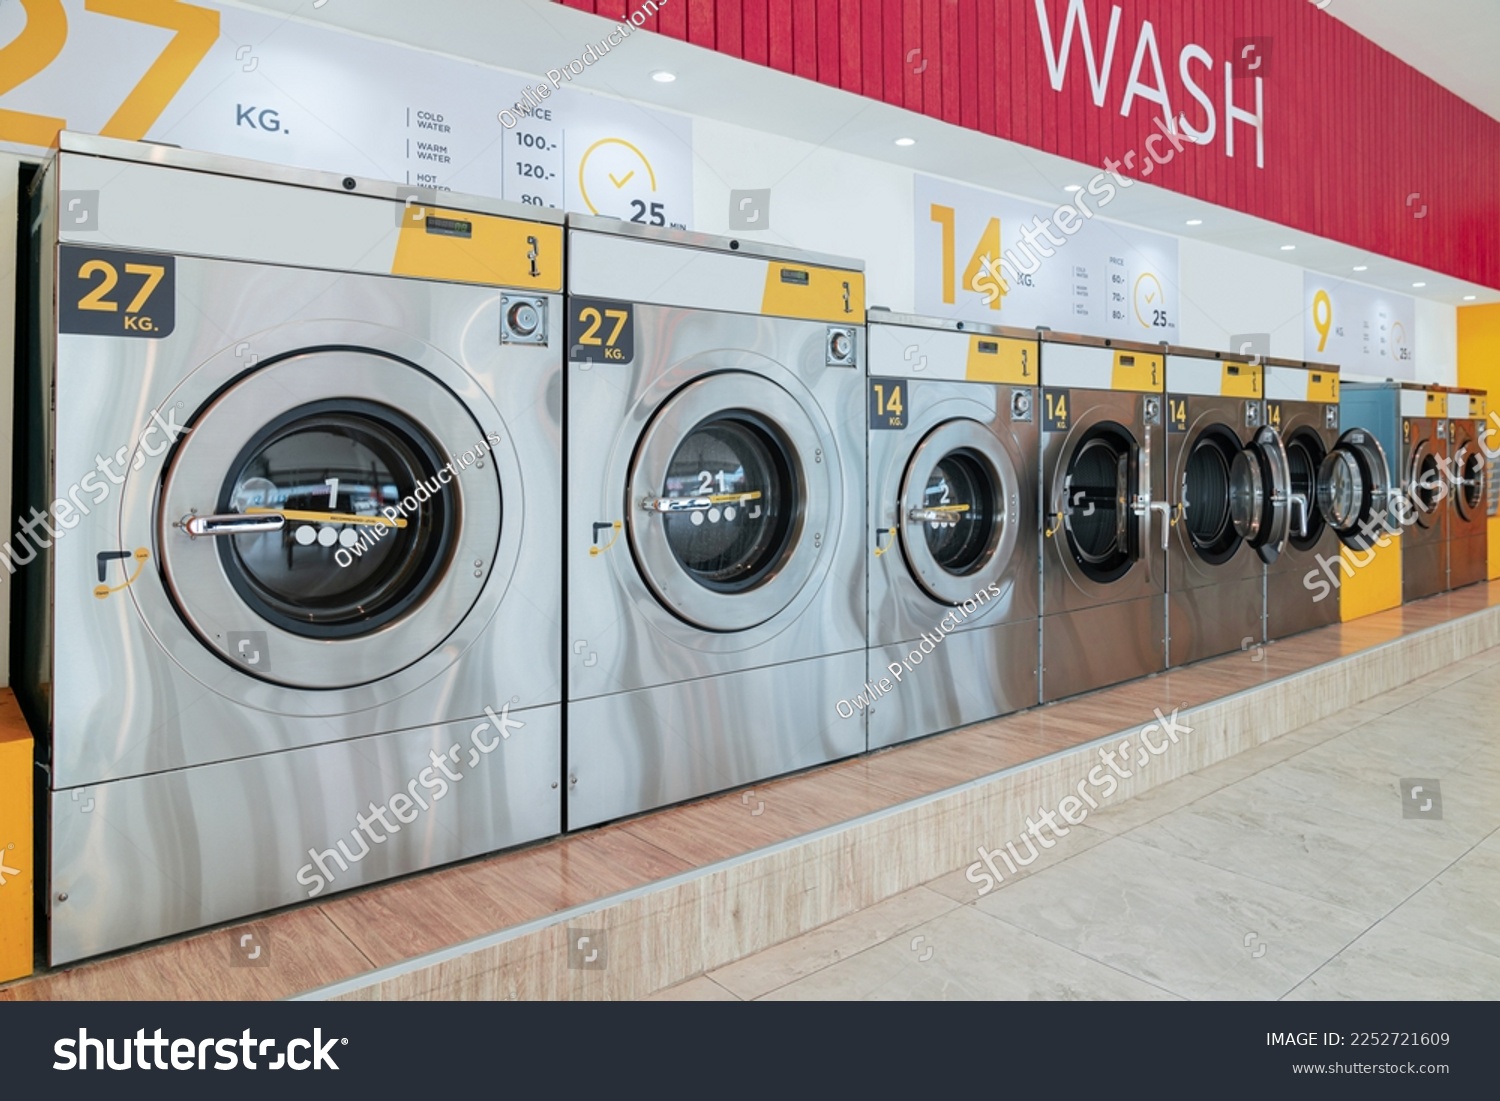 A row of qualified coin-operated washing machines in a public store. Concept of a self service commercial laundry and drying machine in a public room. #2252721609